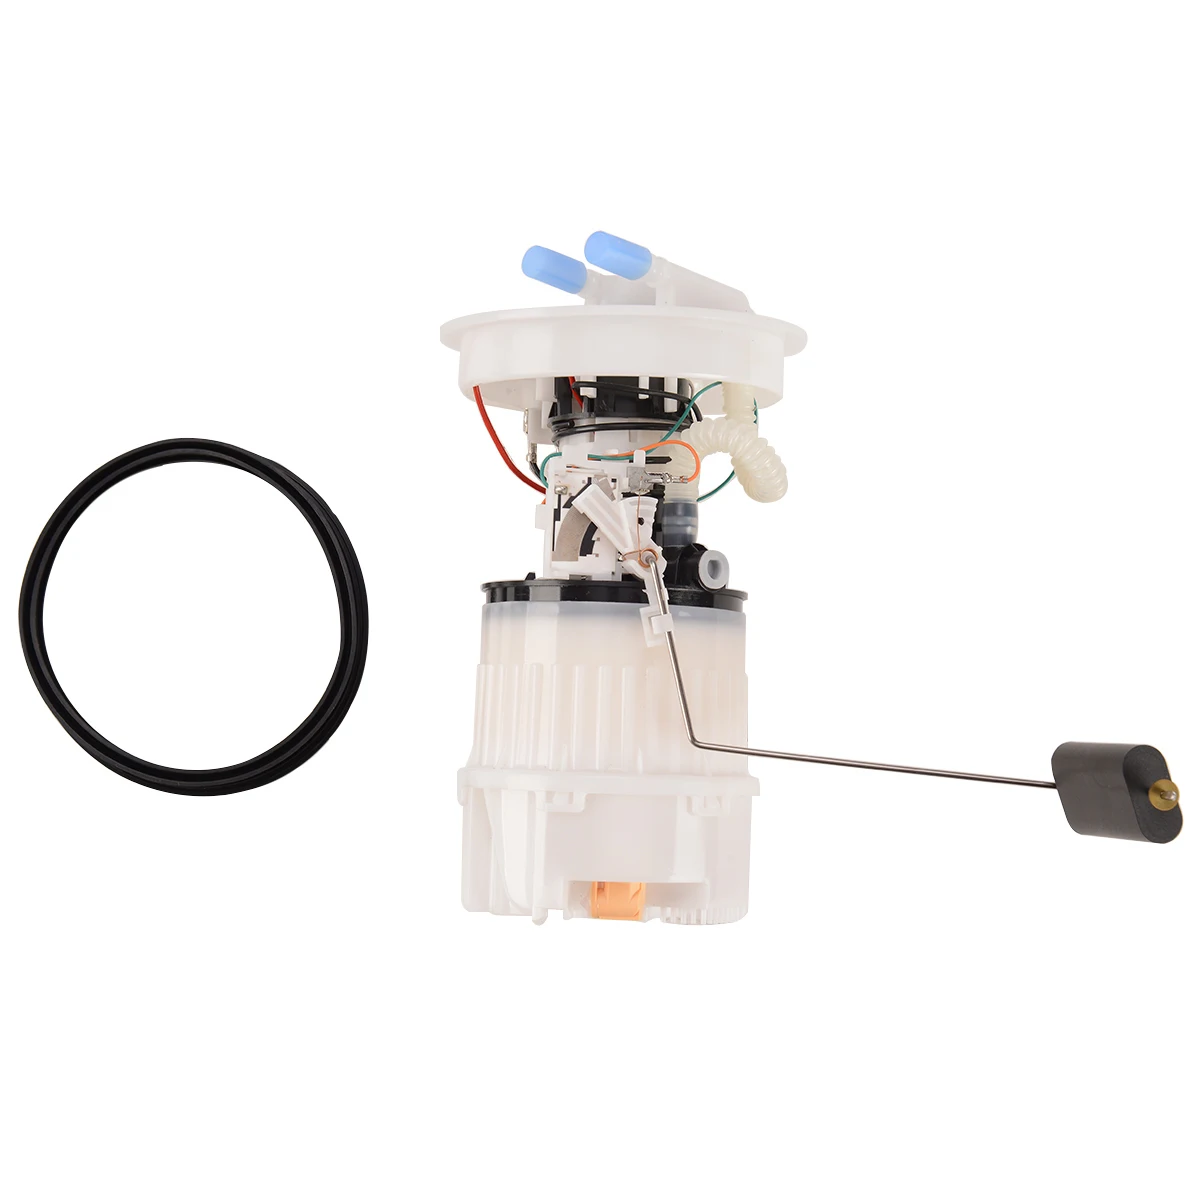 

In-stock CN US Fuel Pump Assembly with Sending Unit for Mazda 3 1.8L Ford Focus L4 2.0L 2004-2009 E9546M